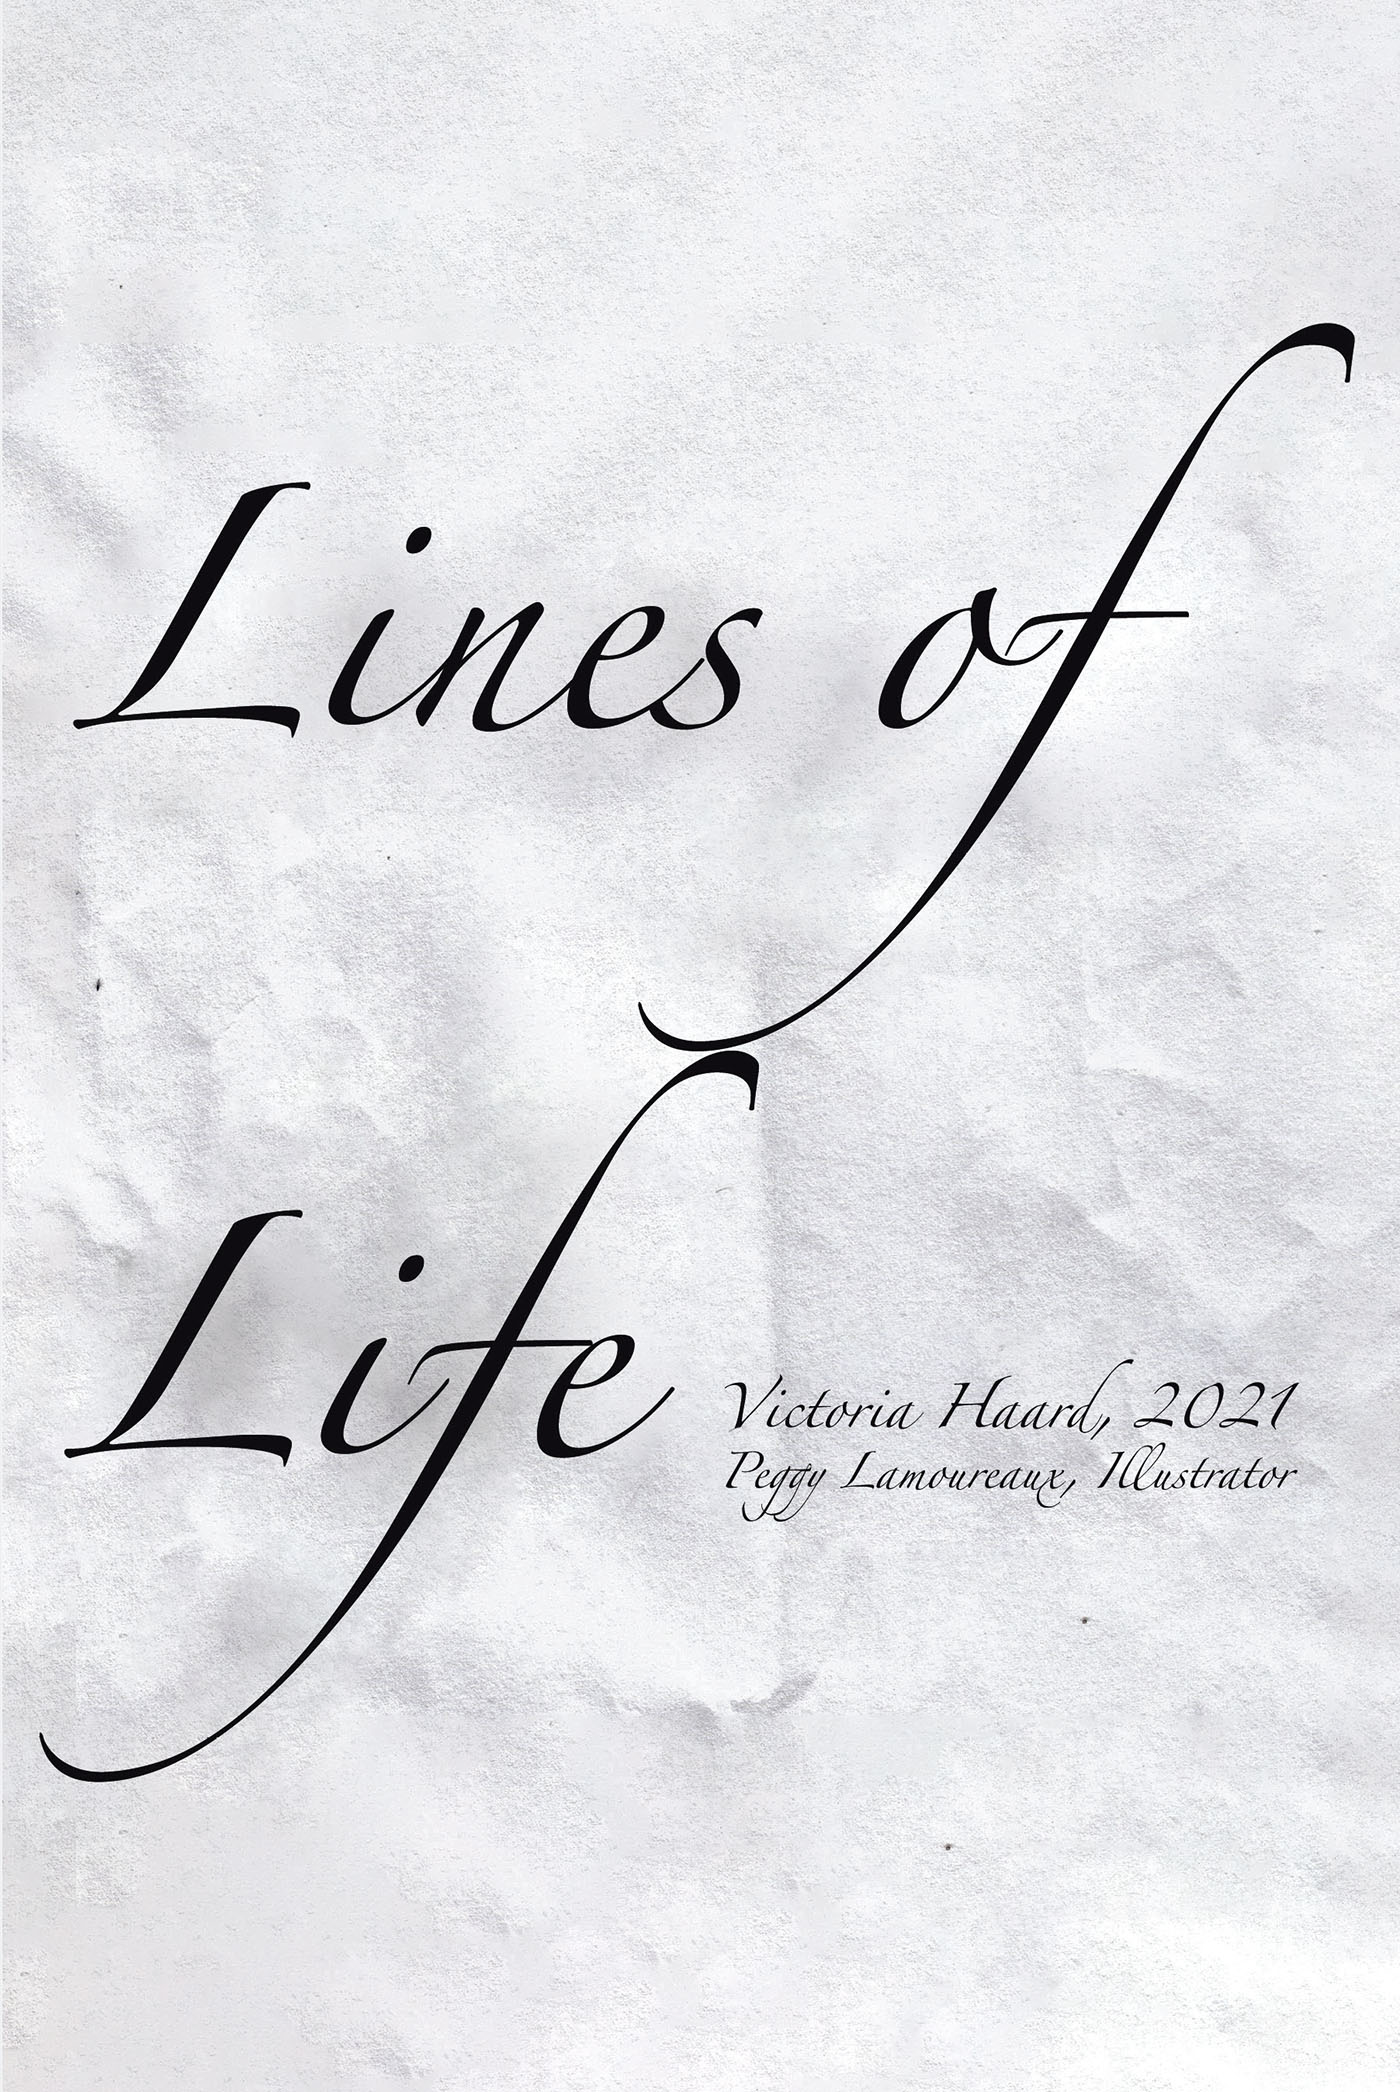 Victoria Haard’s Newly Released "Lines of Life" is a Warm and Uplifting Collection of Thoughtful Poetic Works Inspired by Family, Faith, and a Passion for Life